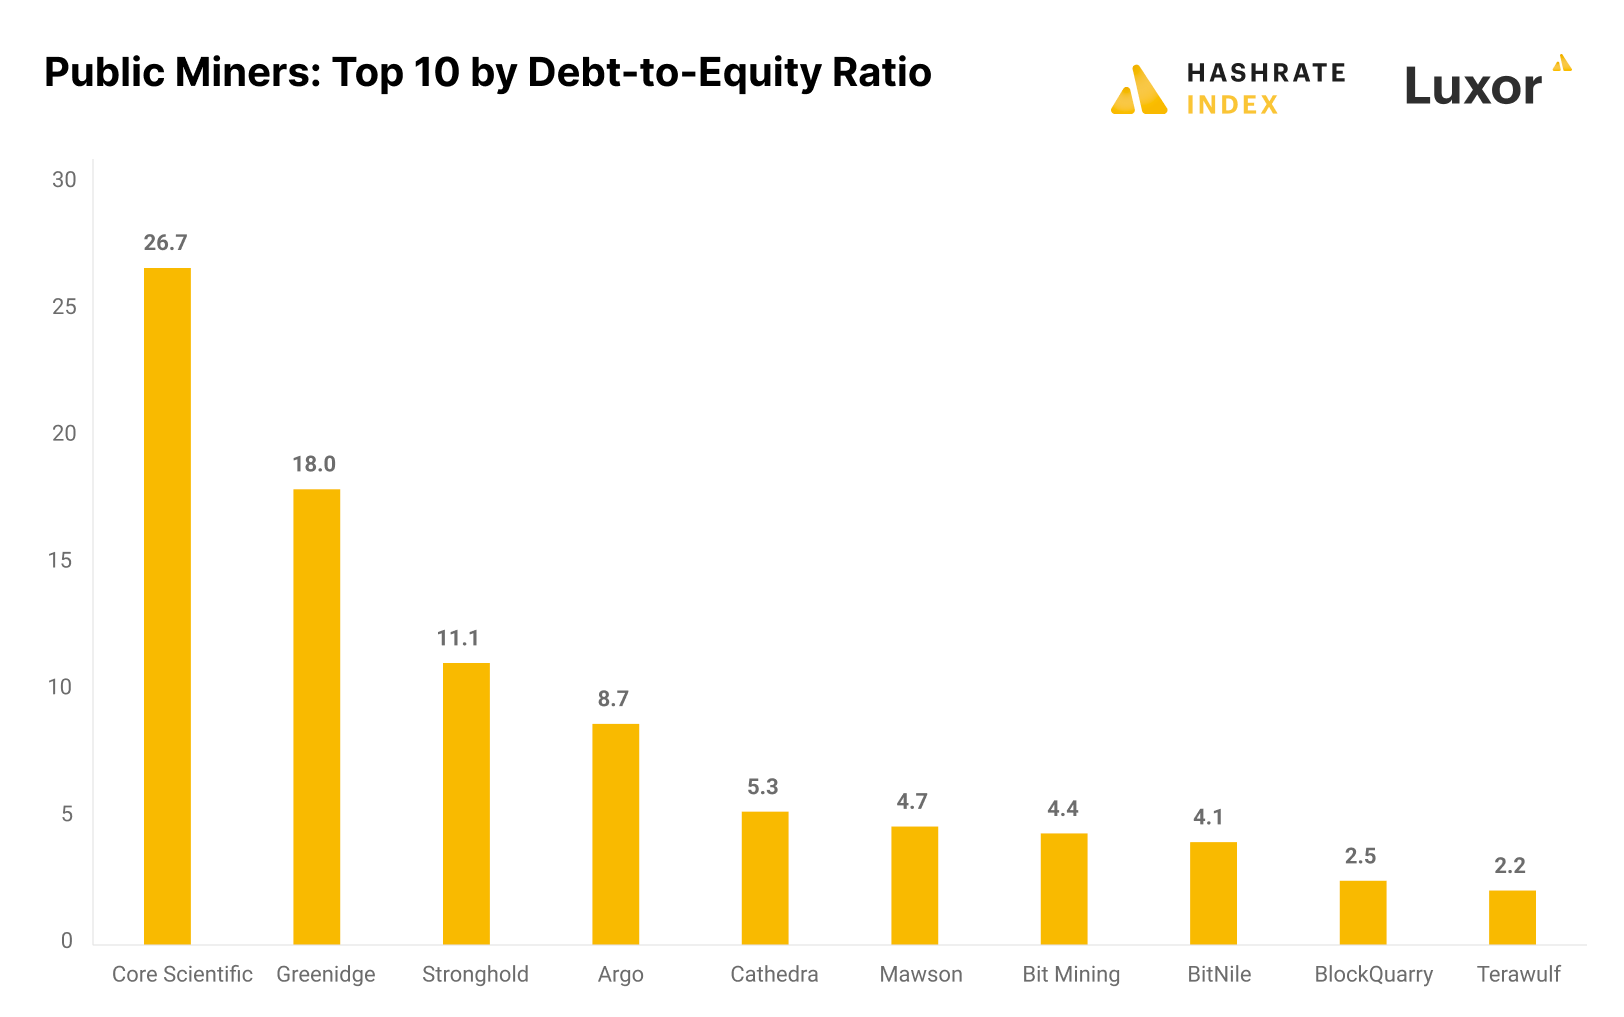 Public Miners: Top 10 by Debt-to-Equity Ratio